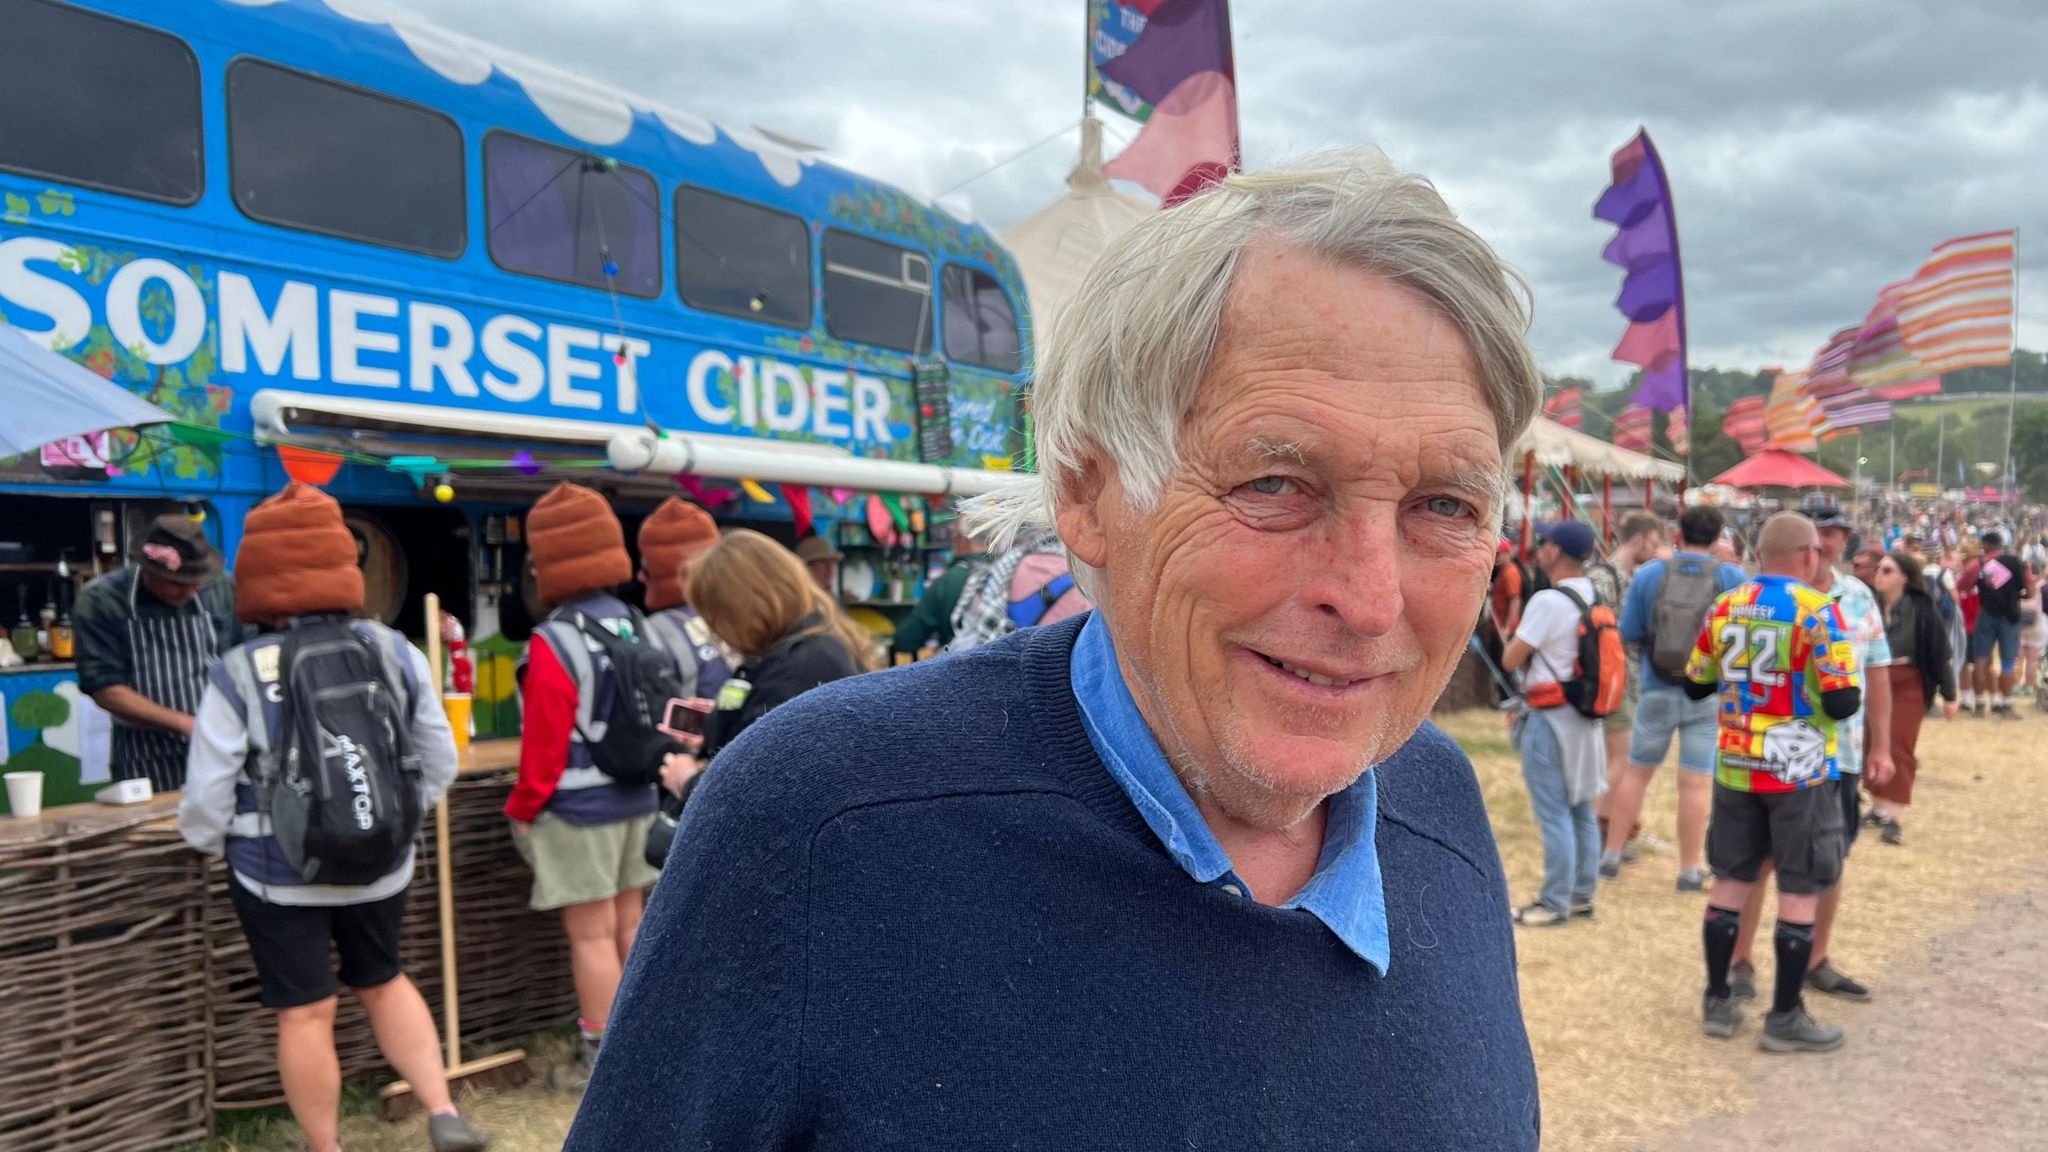 Man stood in front of big blue bus saying 'Cider Bus'